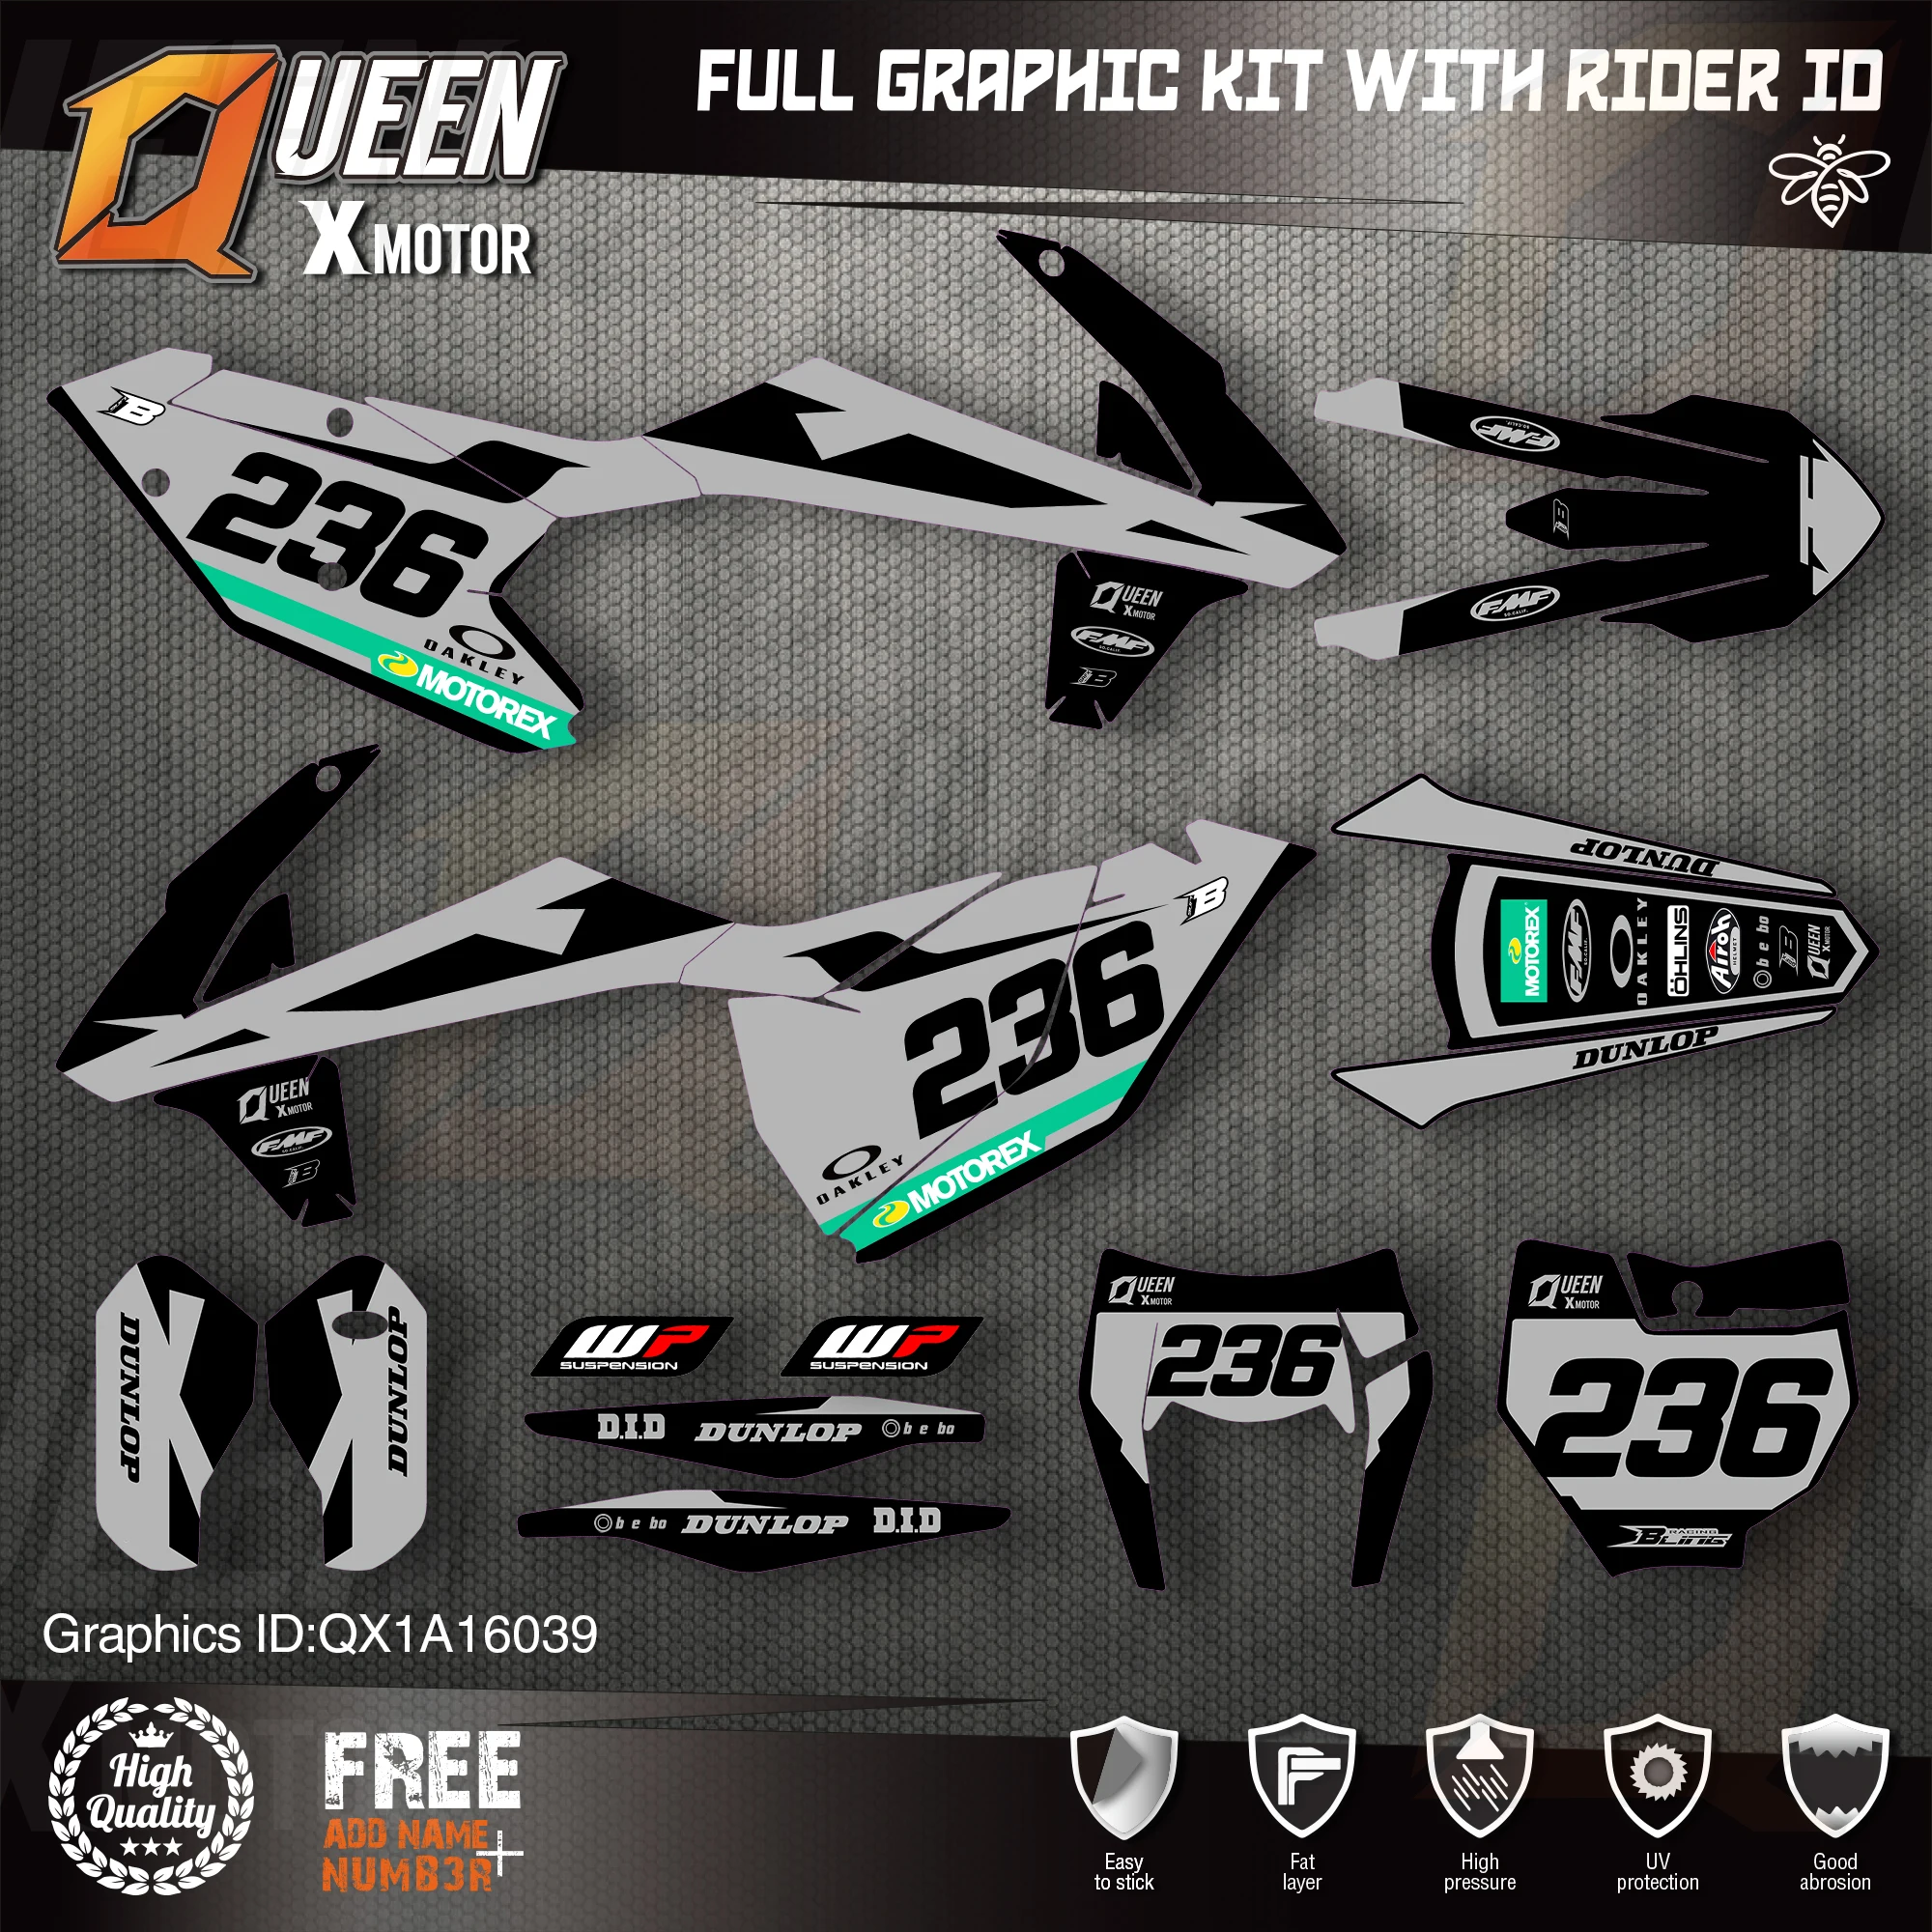 QUEEN X MOTOR Custom Team Graphics Decals Stickers Kit For KTM 2016 2017 2018 SX SXF , 2017 2018 2019 EXC XC-W EXC-F 039